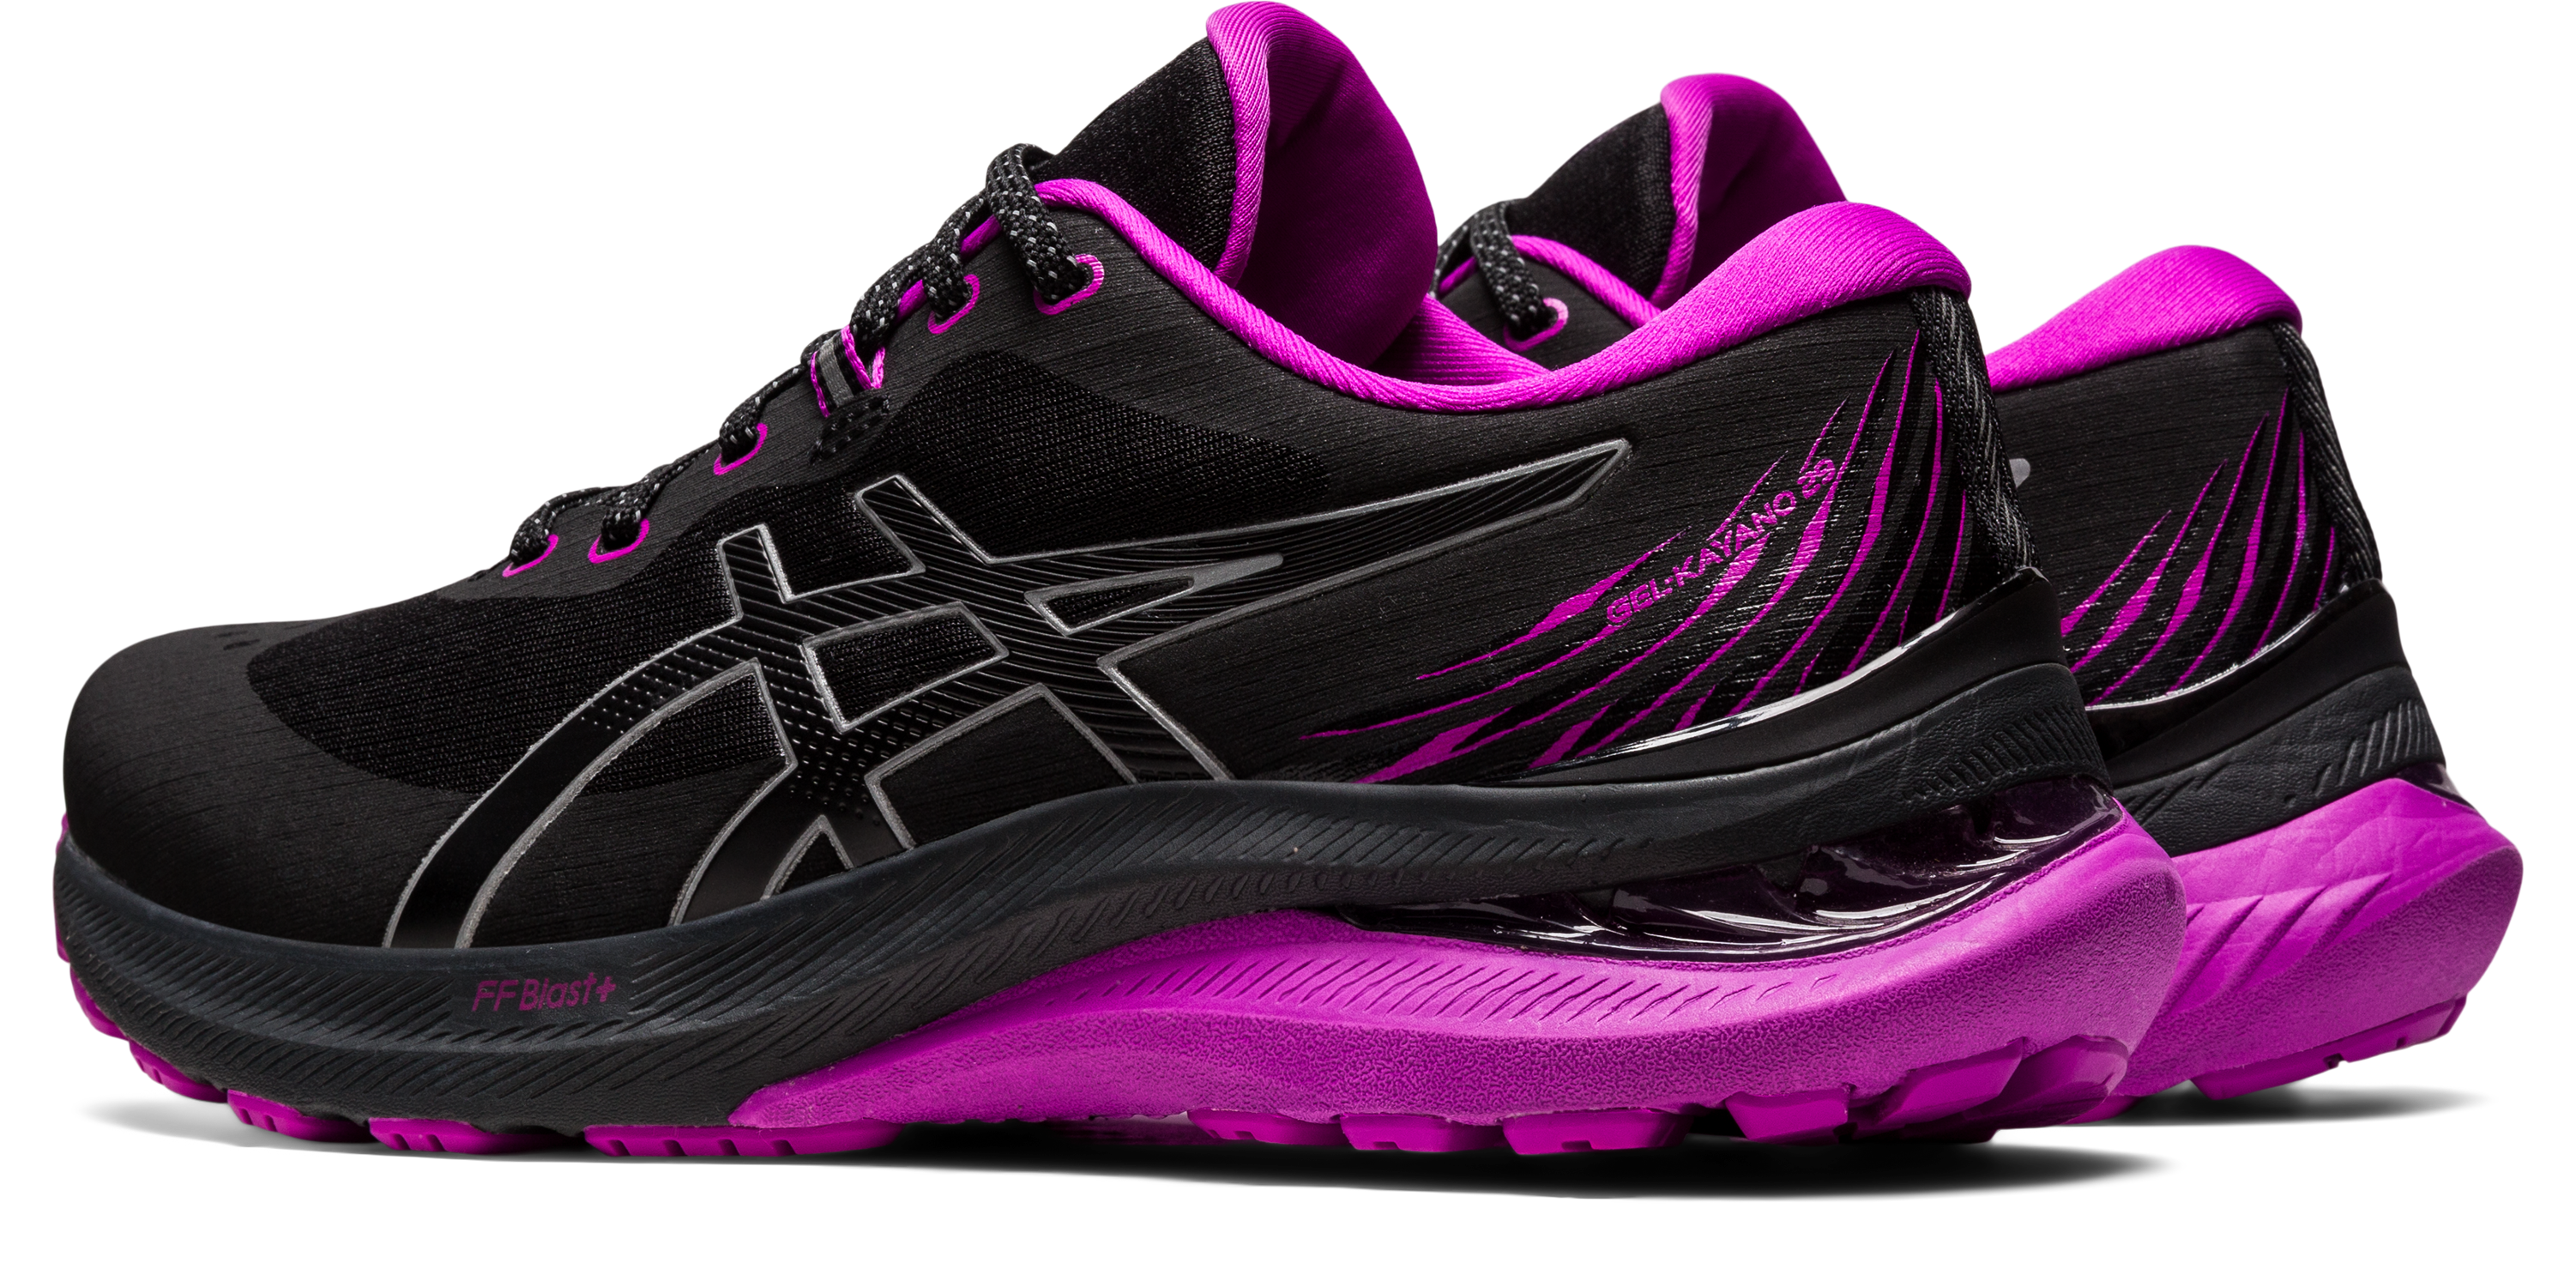 Asics Women's Gel-Kayano 29 Lite-Show Running Shoes in Black/Orchid